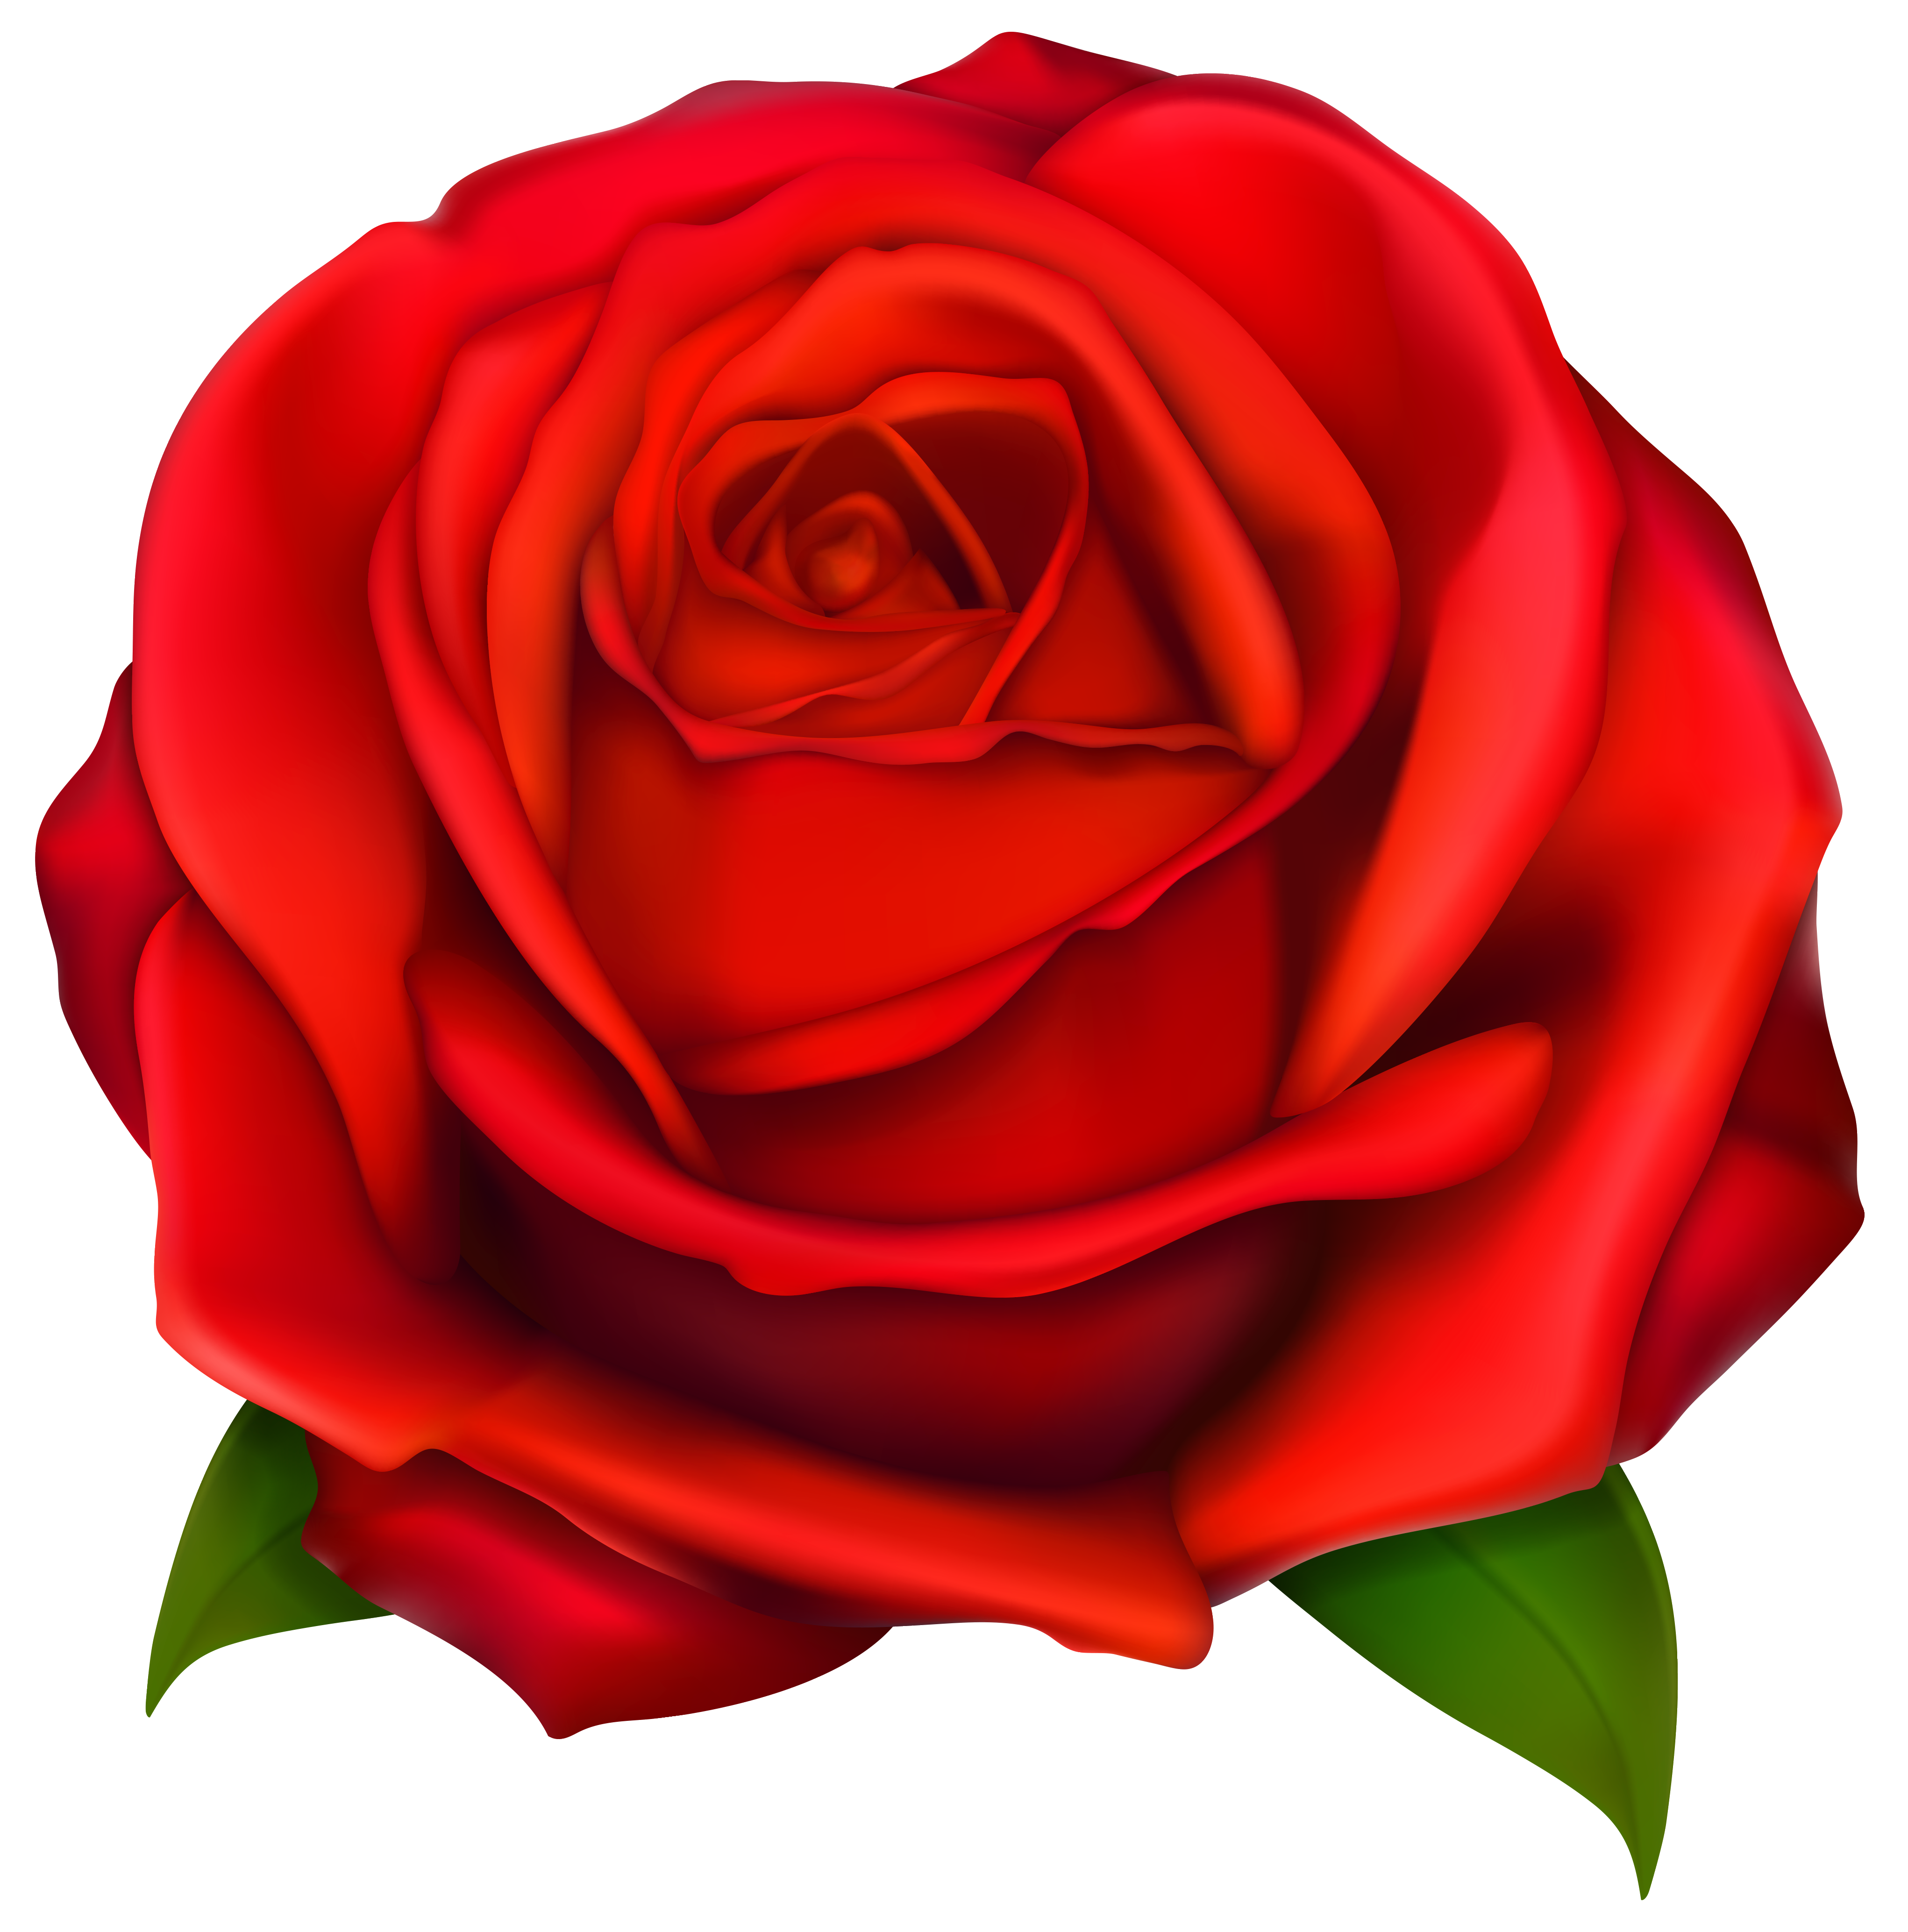 Rose image clipart